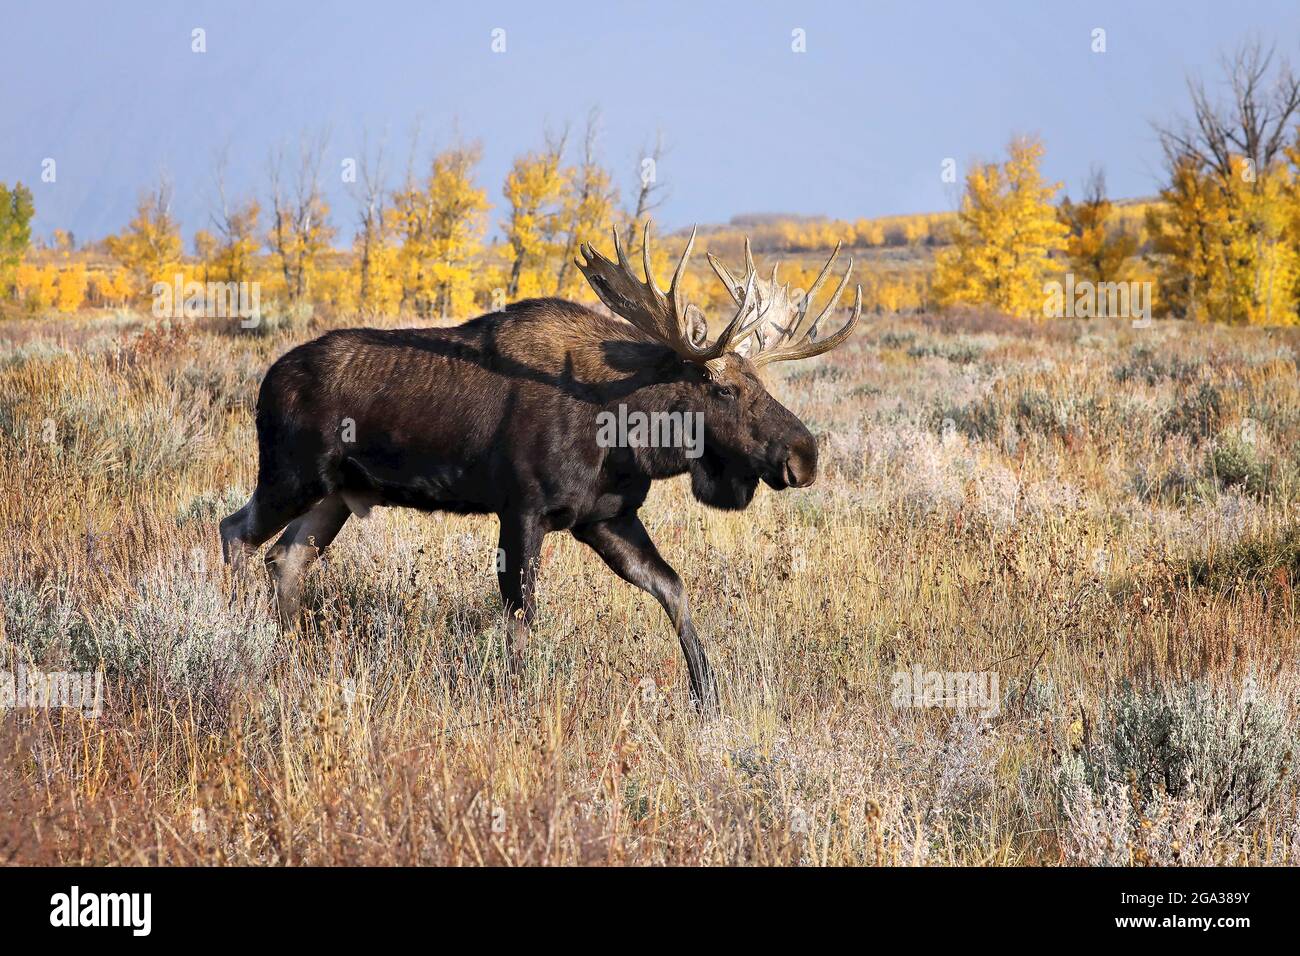 Bull Shiras moose (Alces alces shirasi) moving across a field of brush in autumn, Grand Teton National Park; Wyoming, United States of America Stock Photo